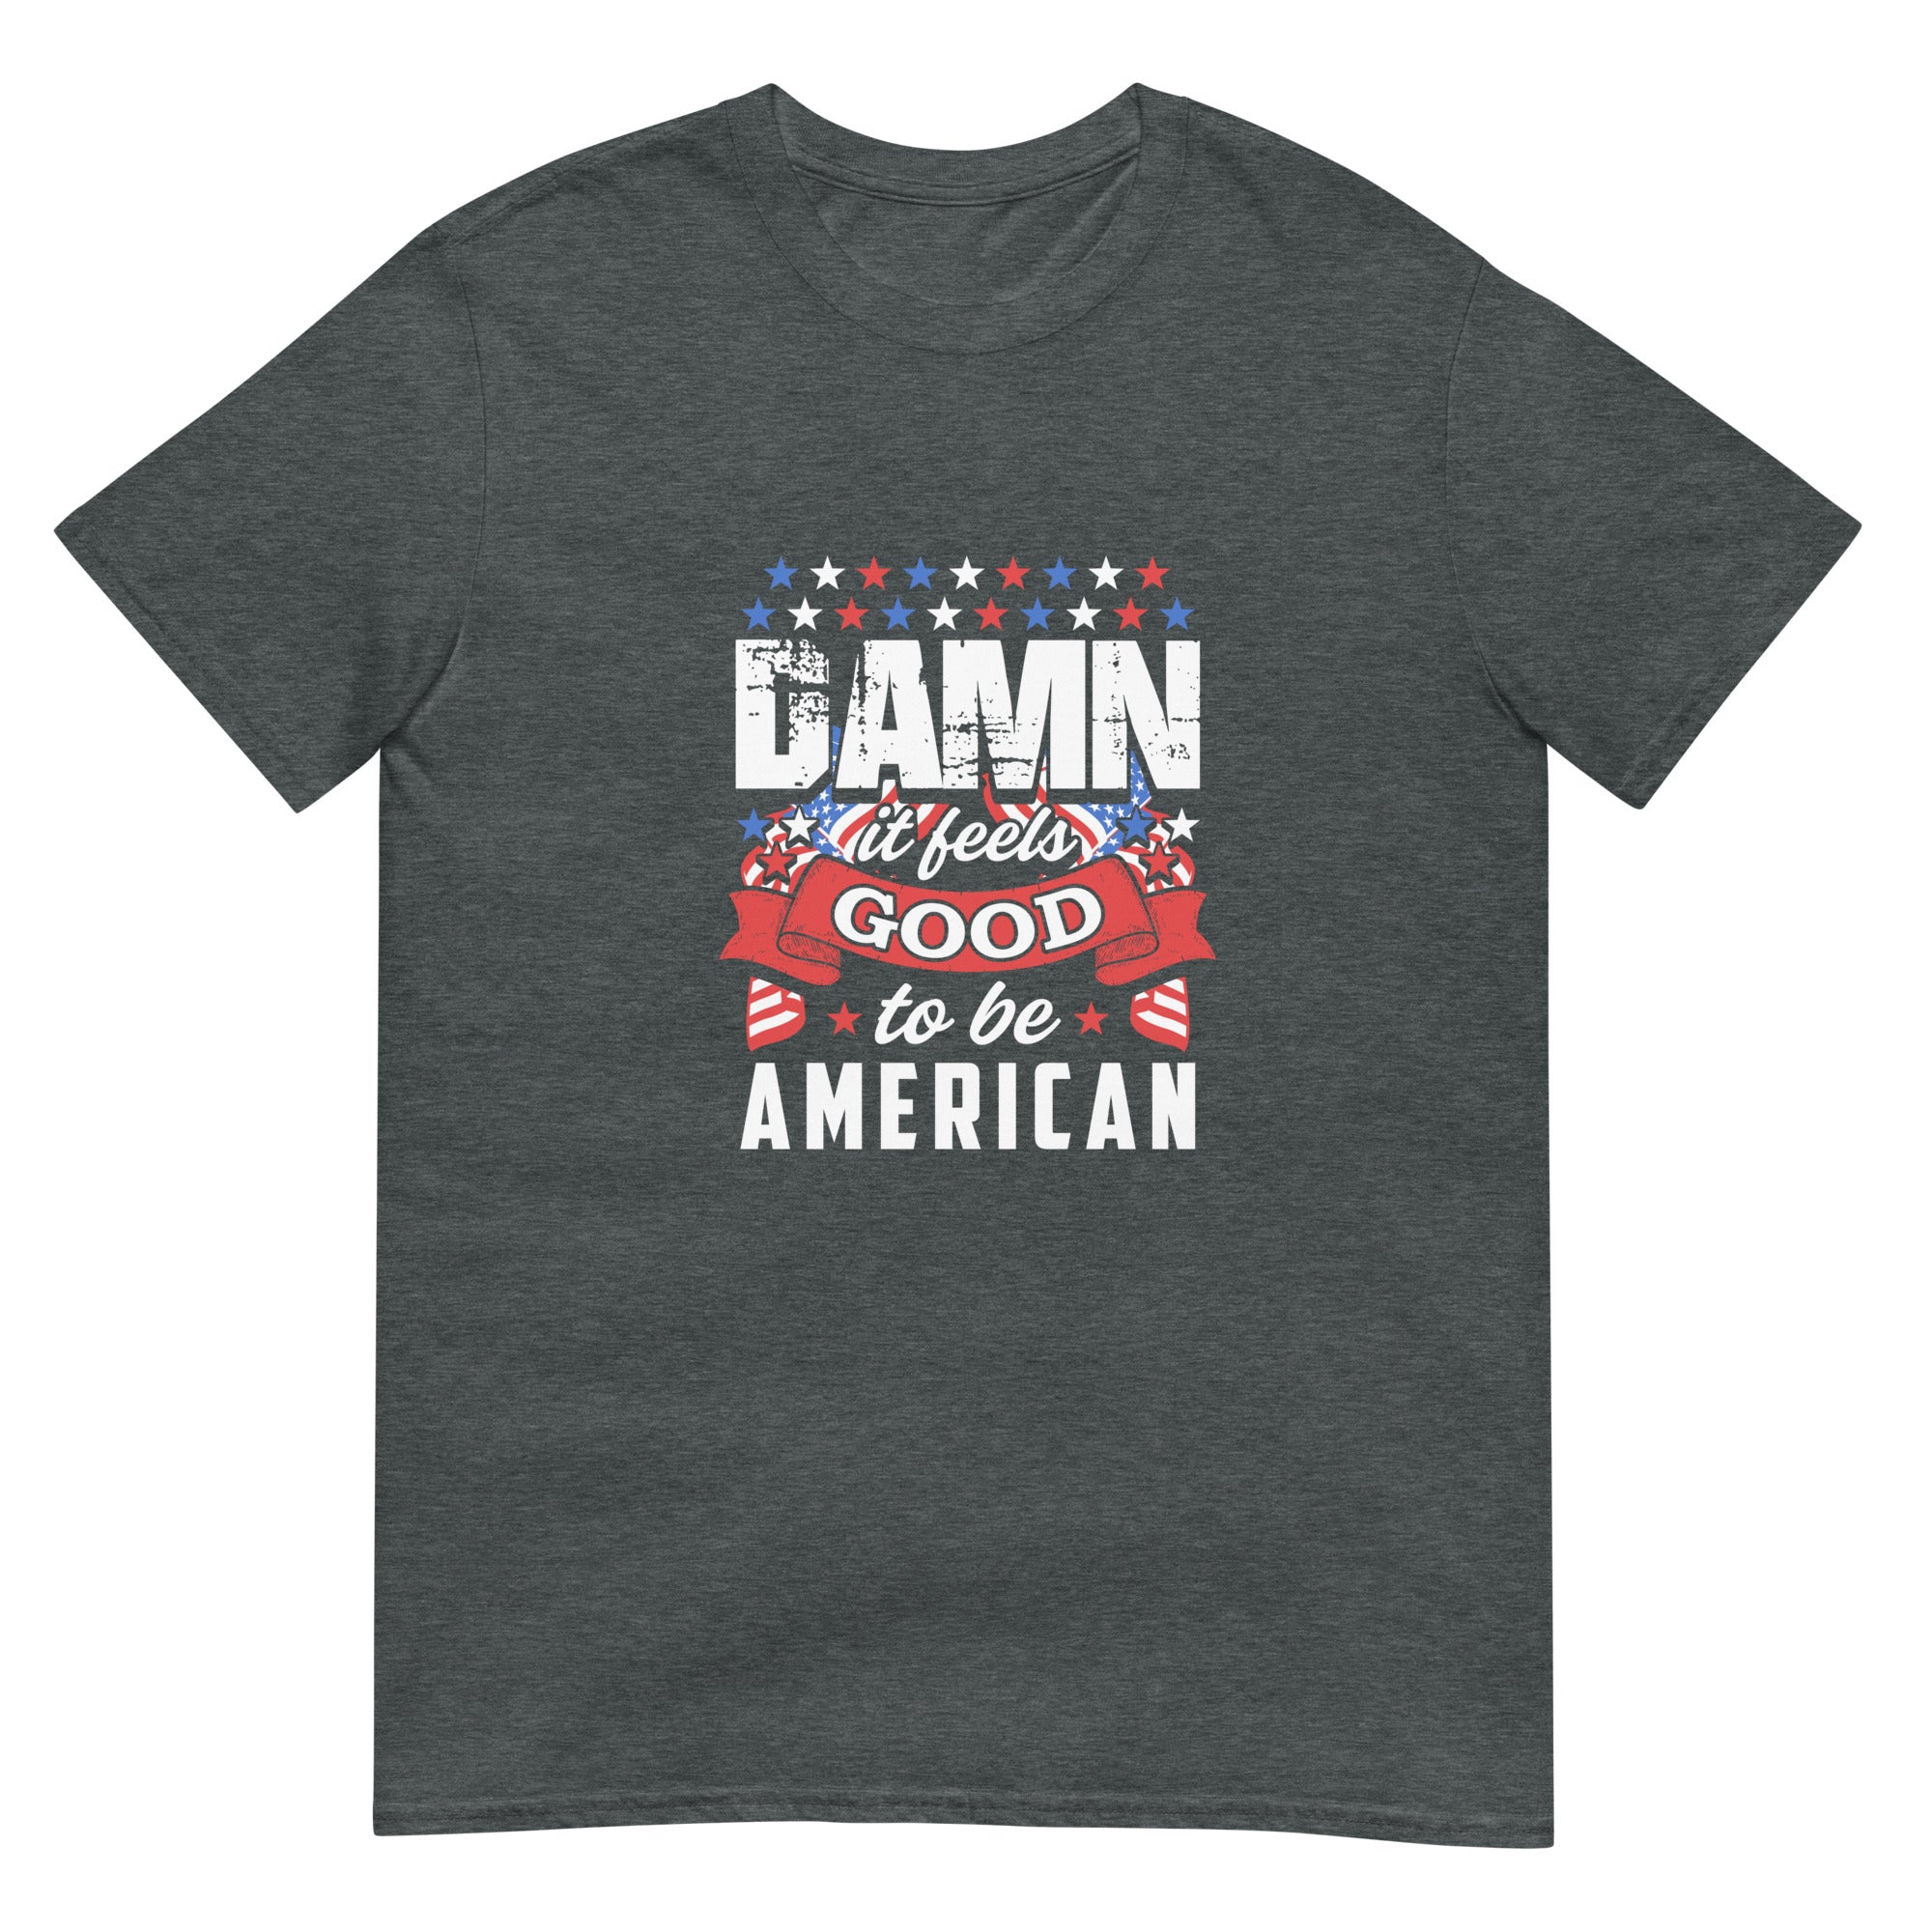 Feels Good to Be American Short-Sleeve Unisex T-Shirt